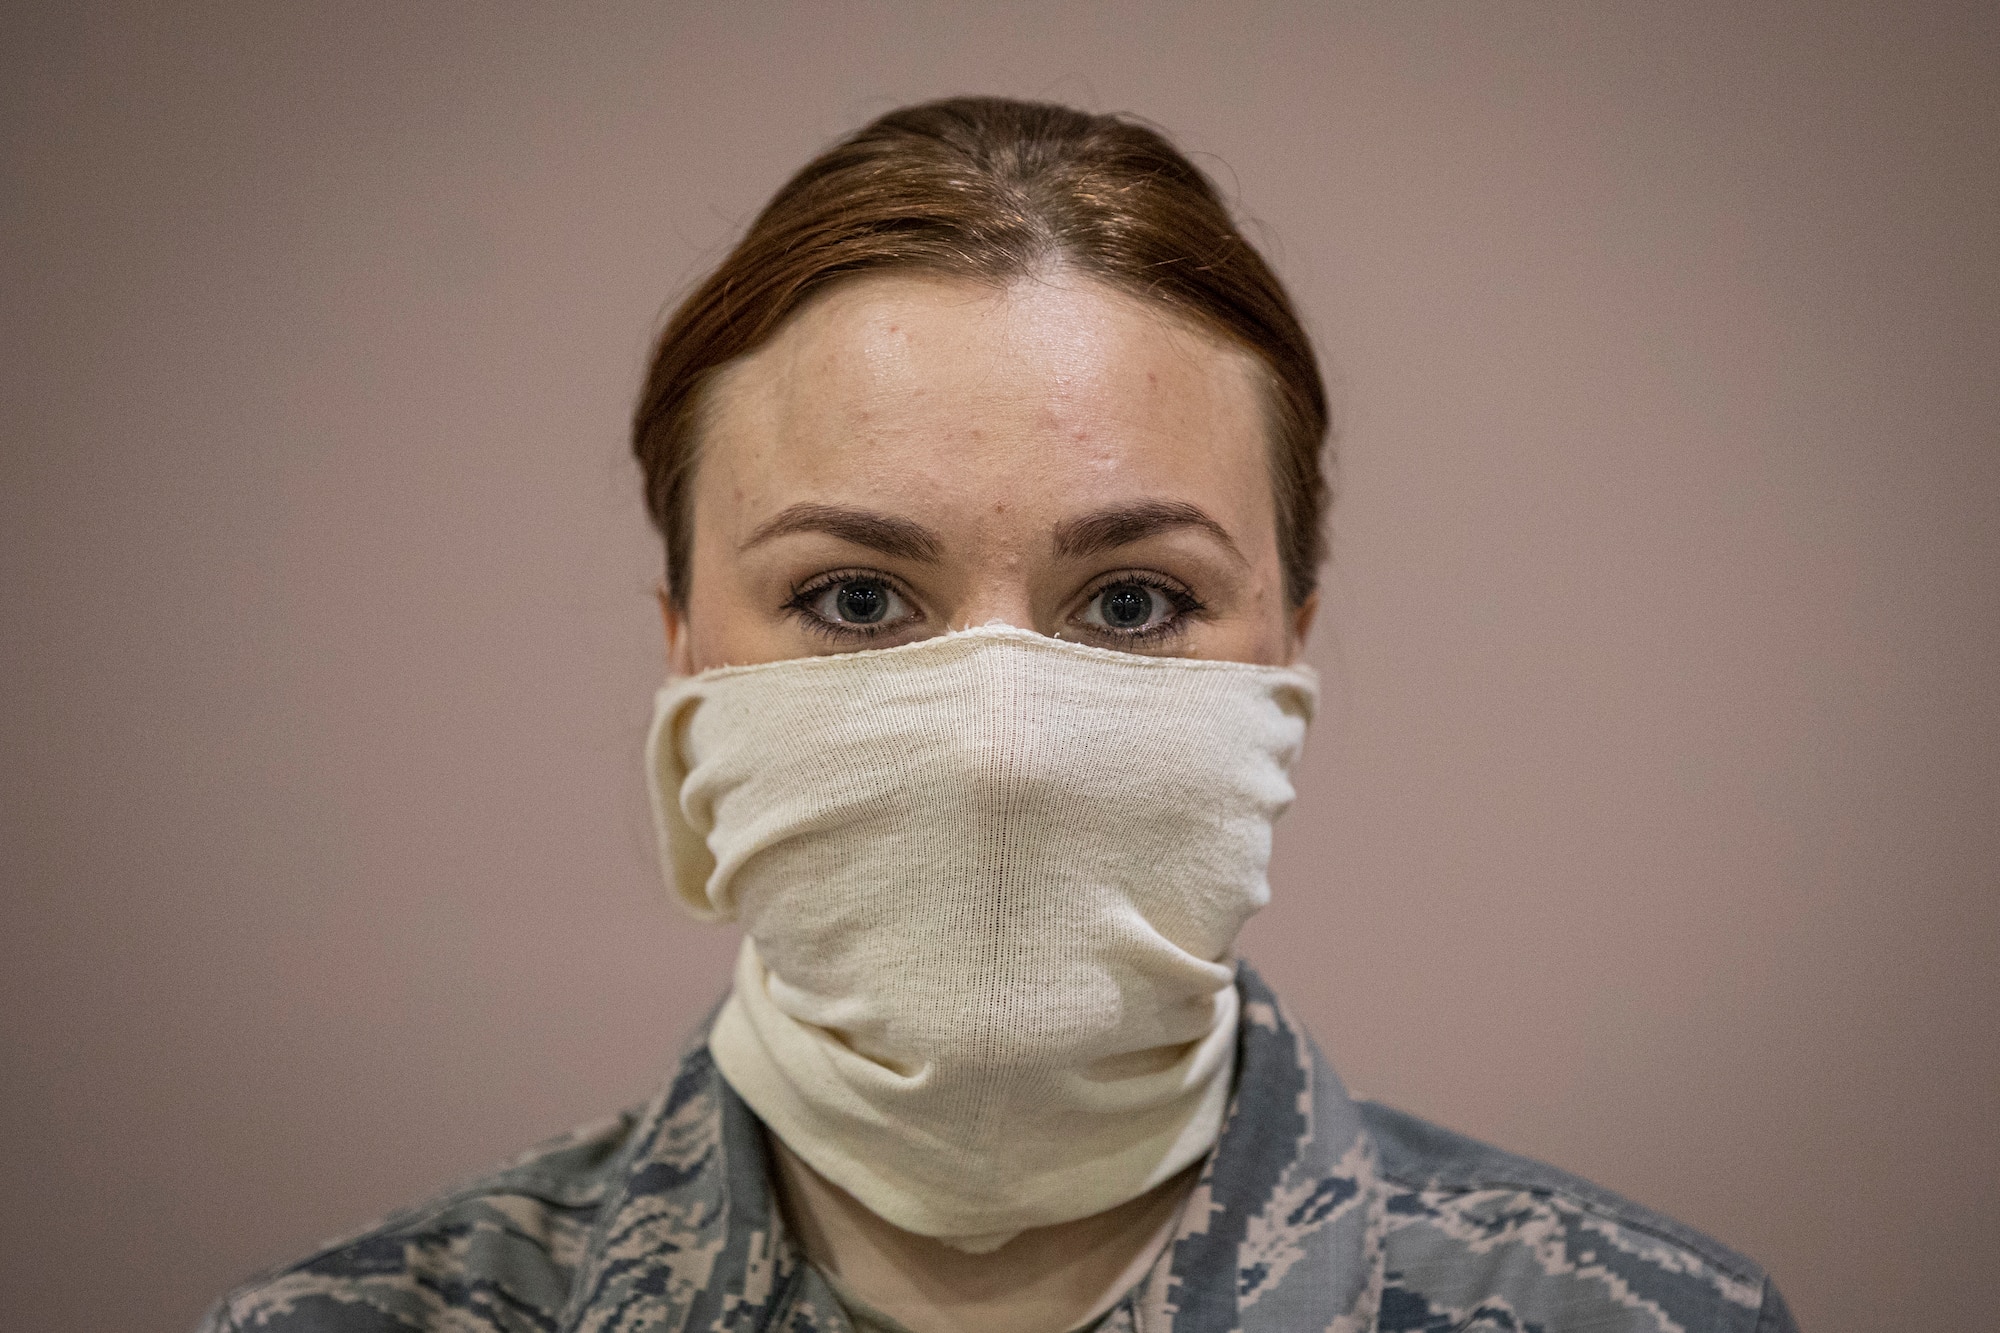 A New Jersey Air National Guard Airman stands for a portrait during the buildup of a Field Medical Station at the Atlantic City Convention Center in Atlantic City, N.J., April 9, 2020.  Atlantic City is one of three stations that will offer overflow from local hospitals focused on COVID-19 patients. (U.S. Air National Guard photo by Master Sgt. Matt Hecht)